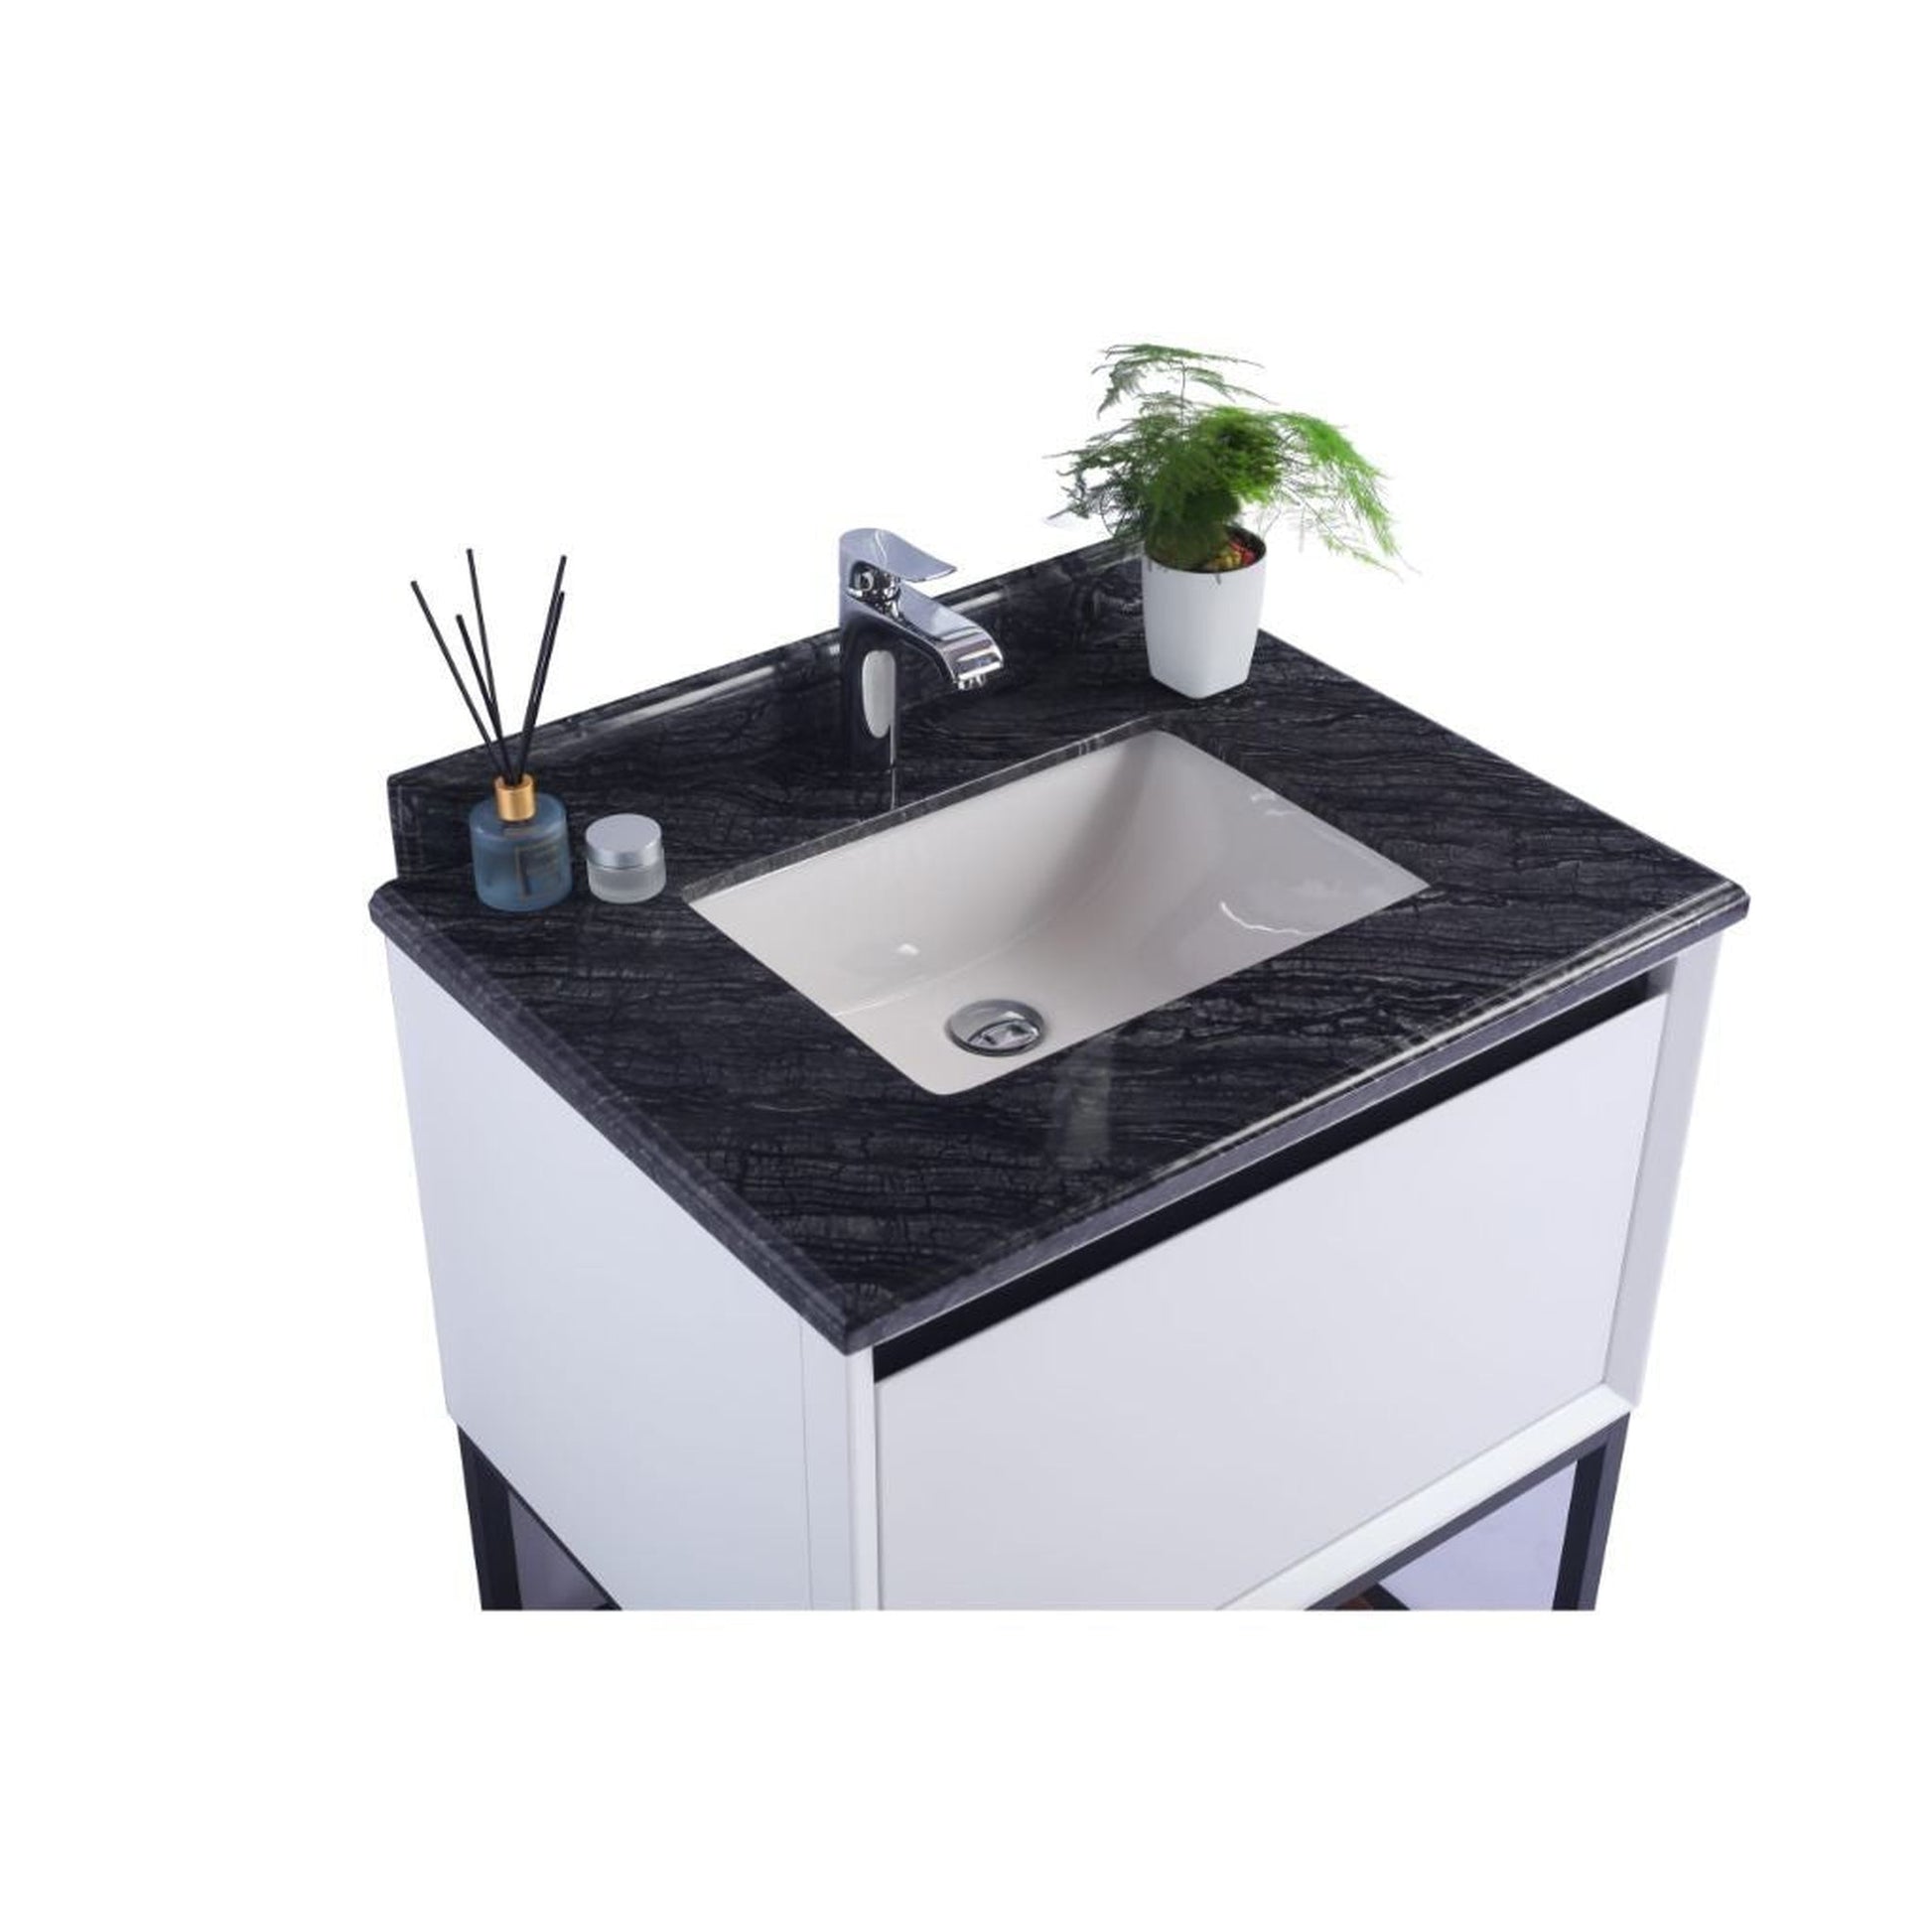 Laviva Alto 30" White Vanity Base and Black Wood Marble Countertop With Rectangular Ceramic Sink